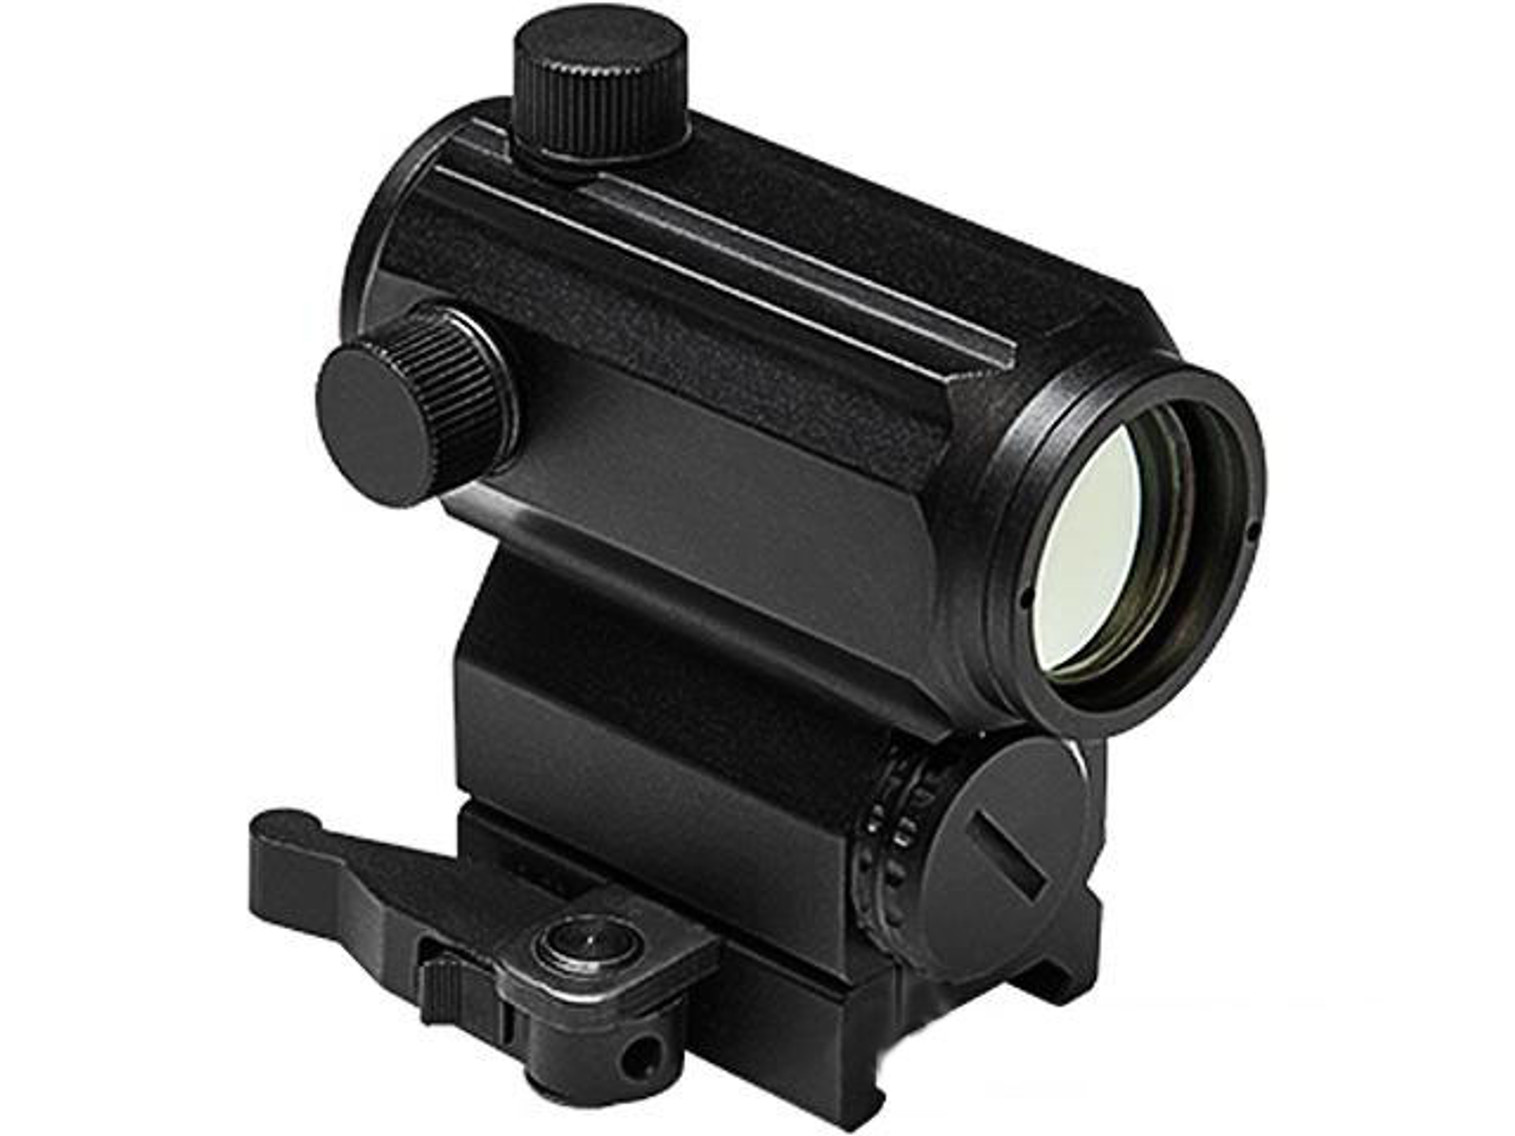 NcStar Micro Red & Blue Dot Scope with Integrated Riser - Black